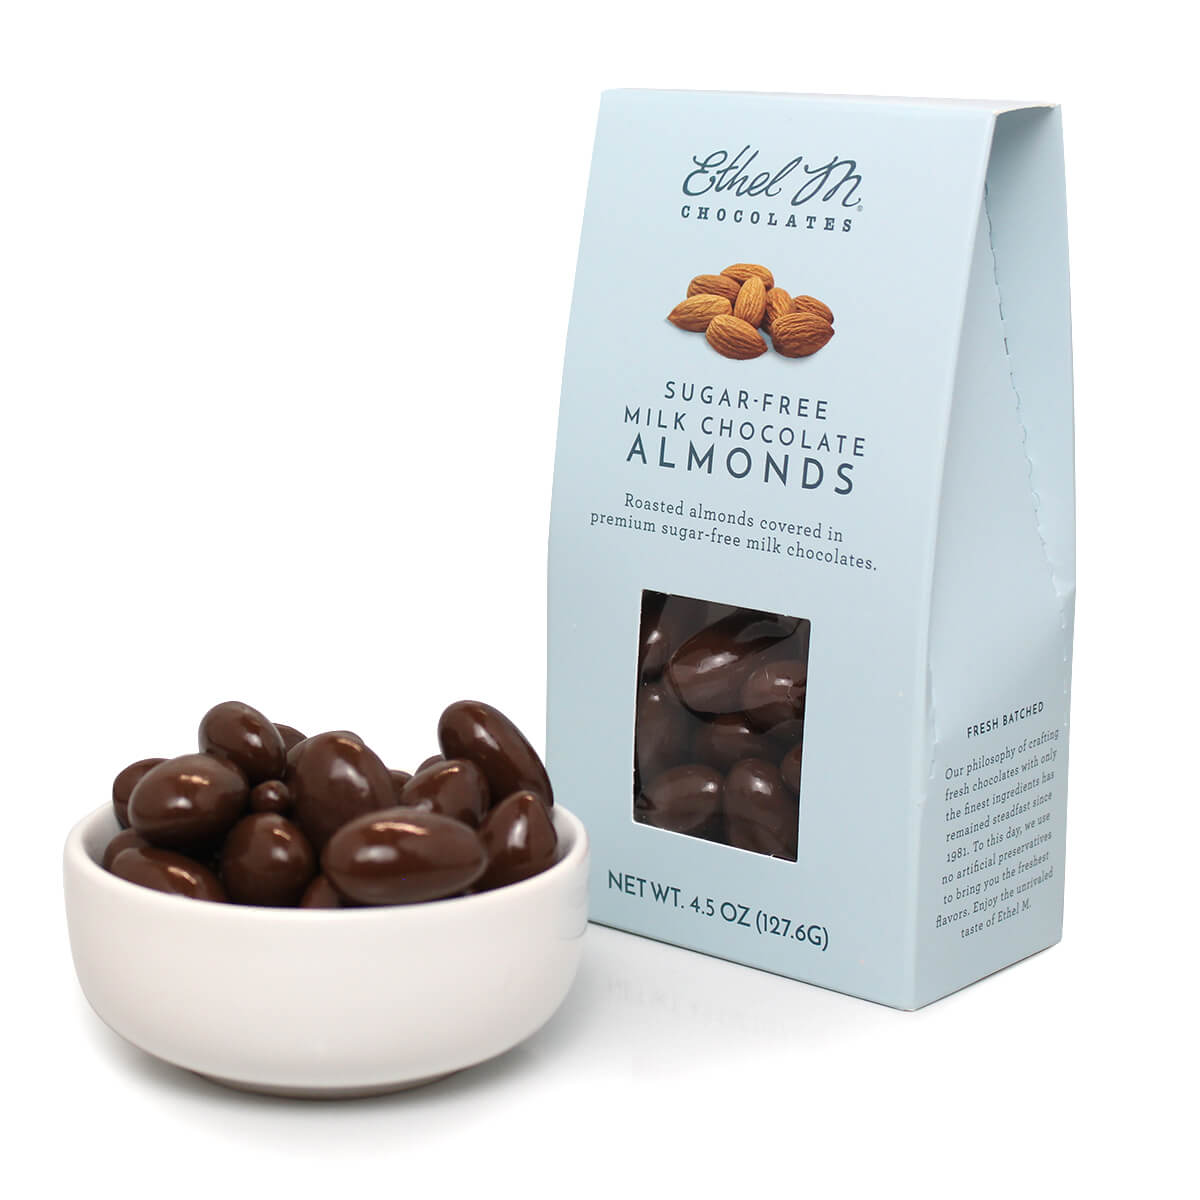 Enjoy Ethel M Chocolates Delicious Roasted Almonds covered in our Premium Sugar free Milk Chocolate.